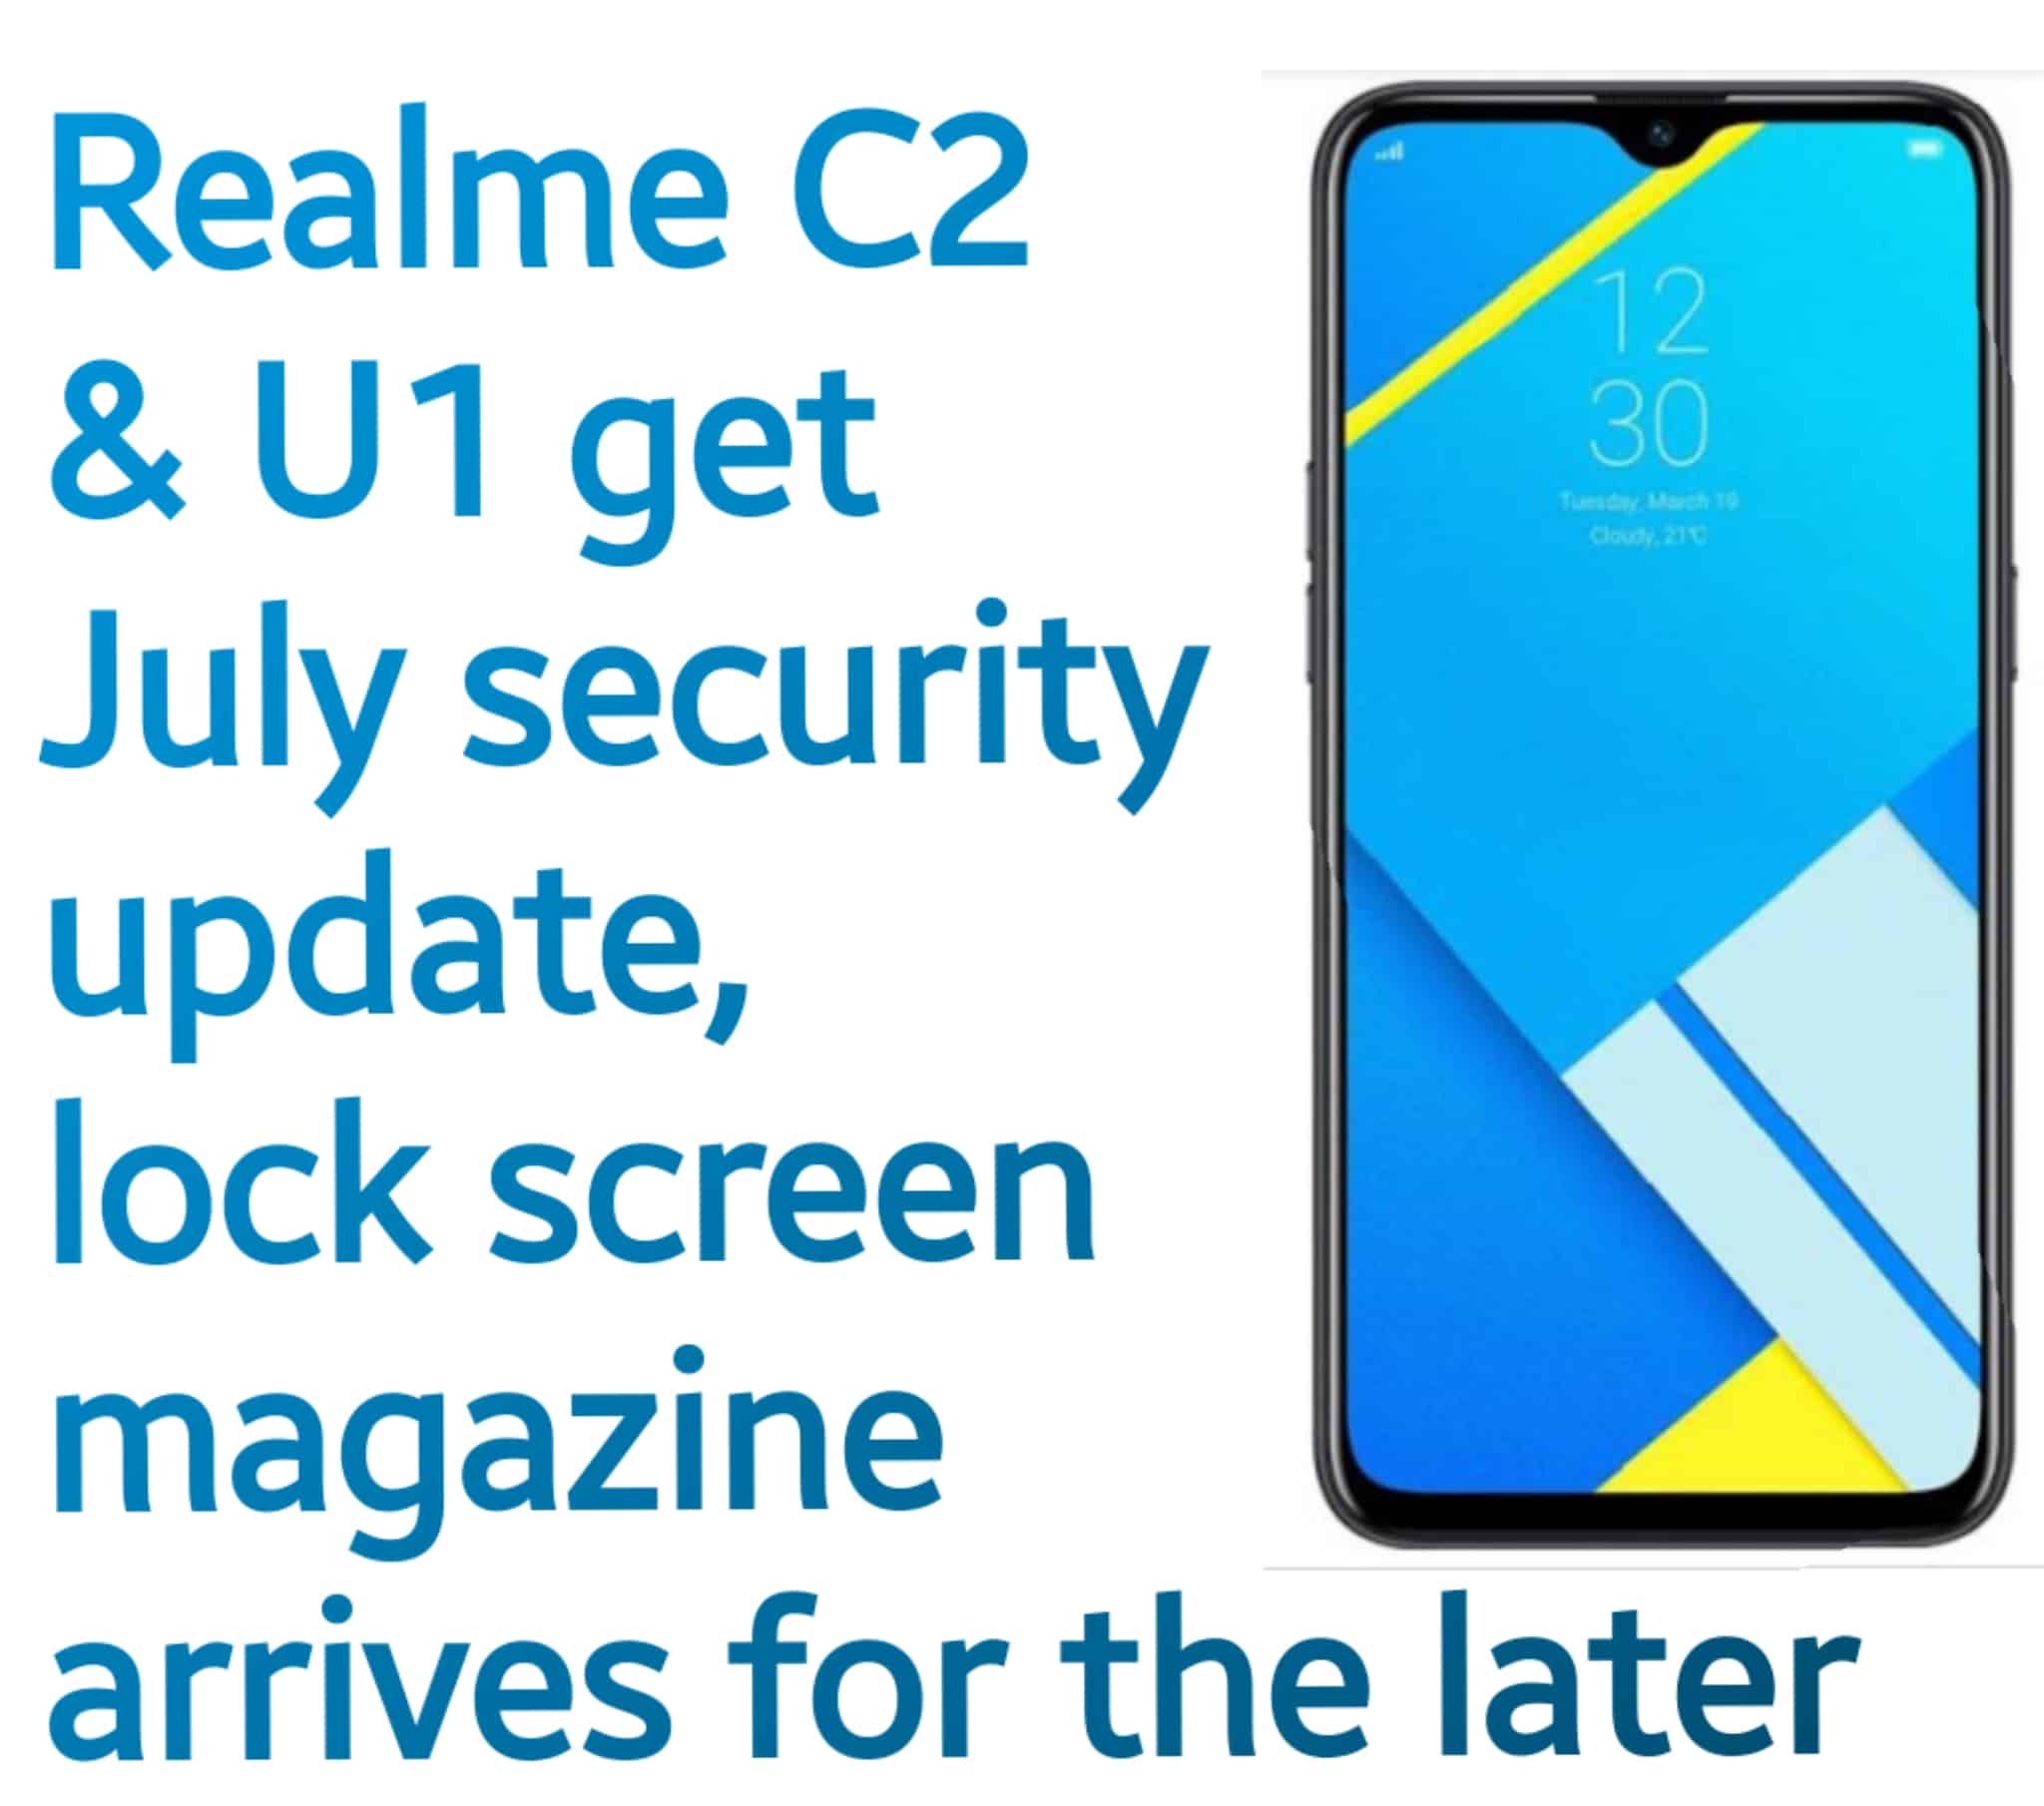 Realme C2 & U1 get July security update, lock screen magazine arrives for the later